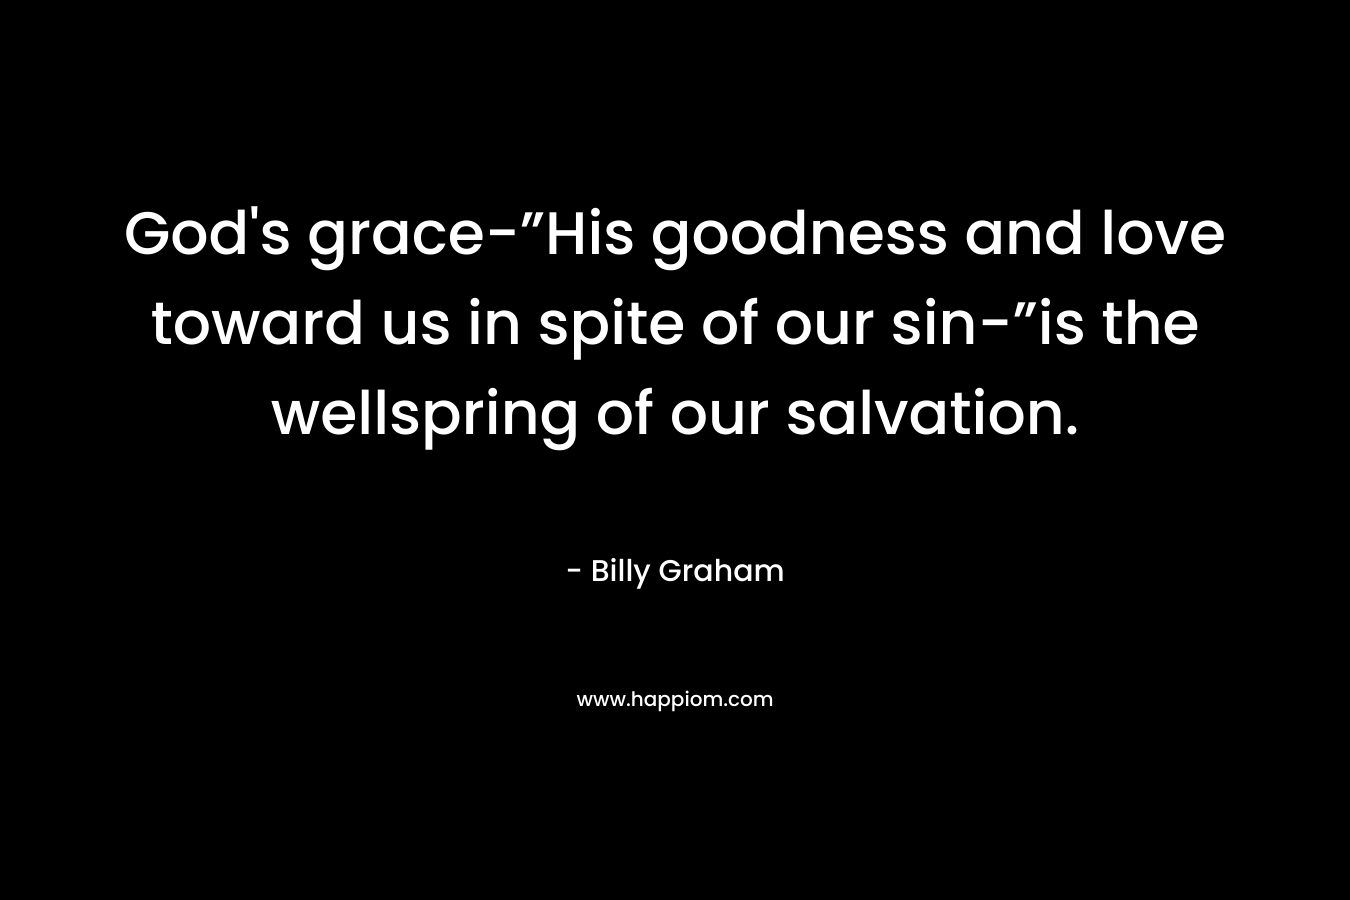 God’s grace-”His goodness and love toward us in spite of our sin-”is the wellspring of our salvation. – Billy Graham